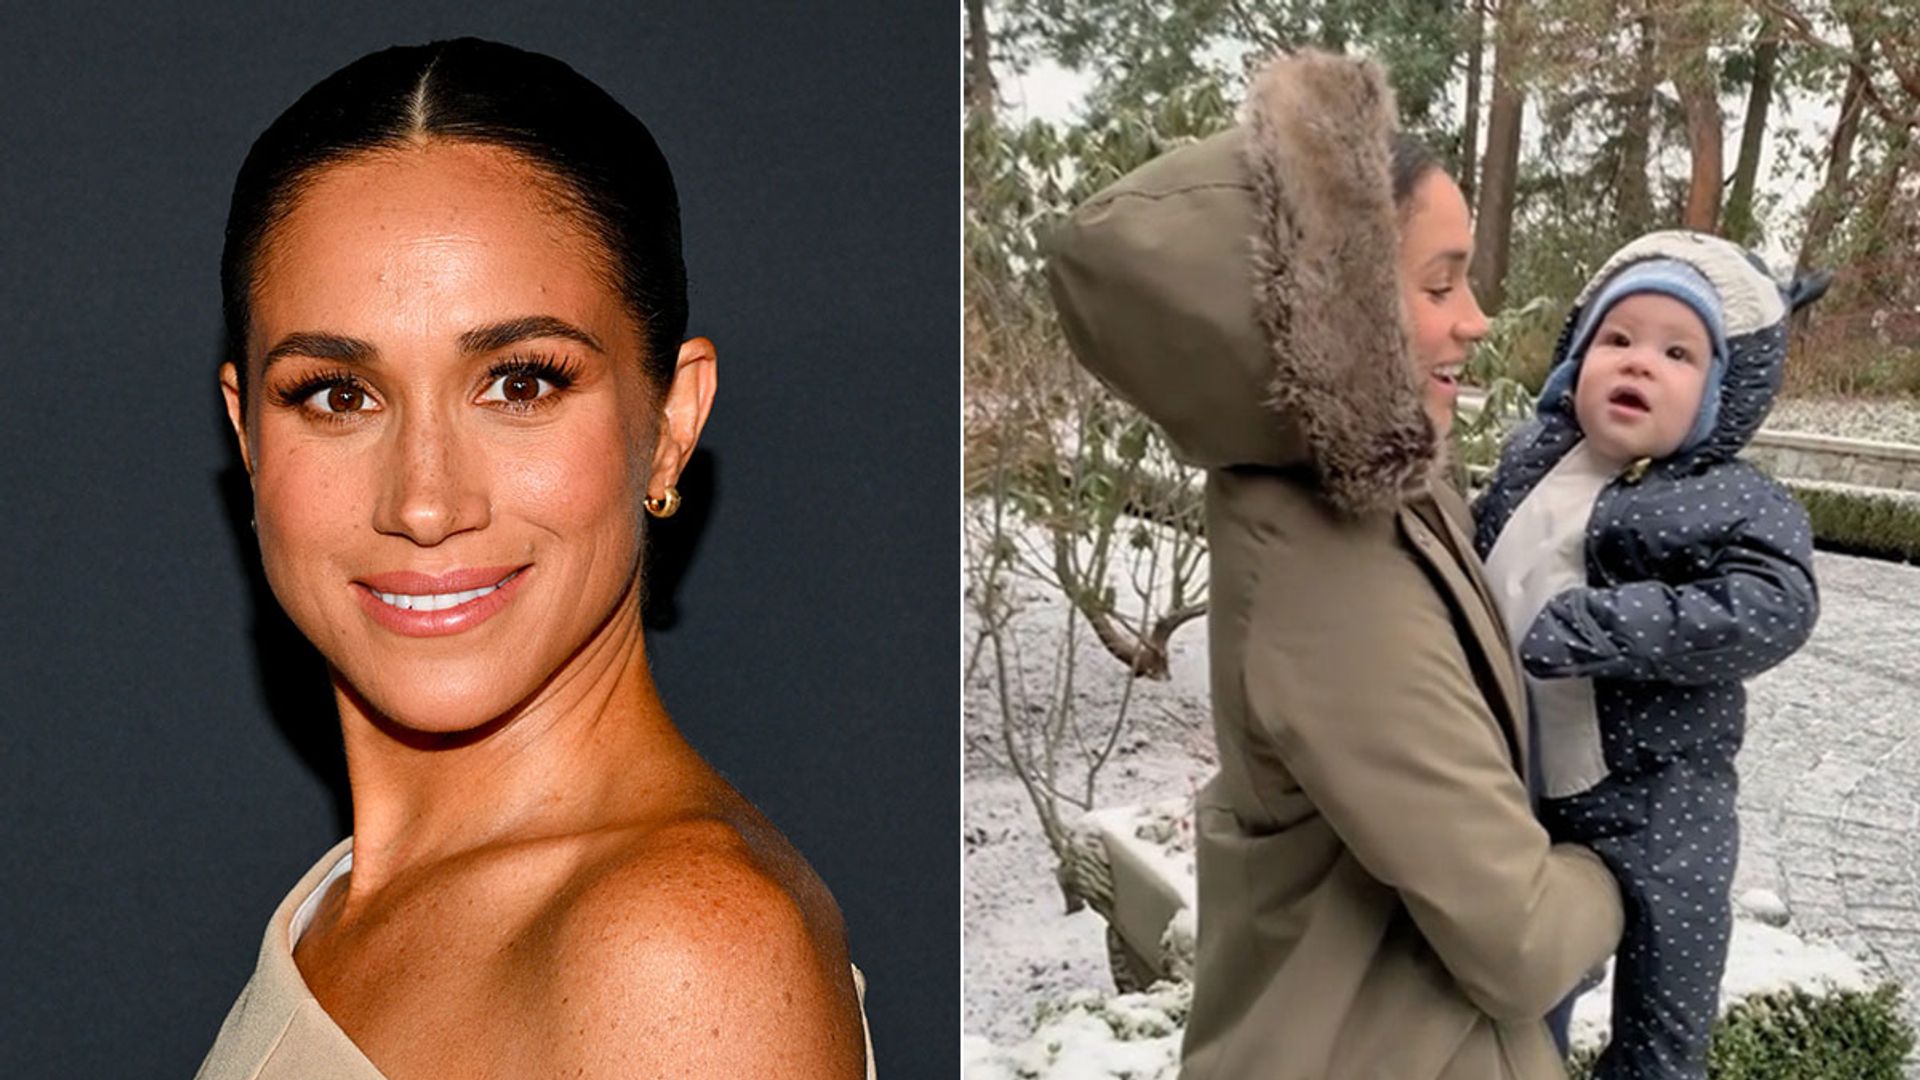 Meghan Markle with son Prince Archie in the snow